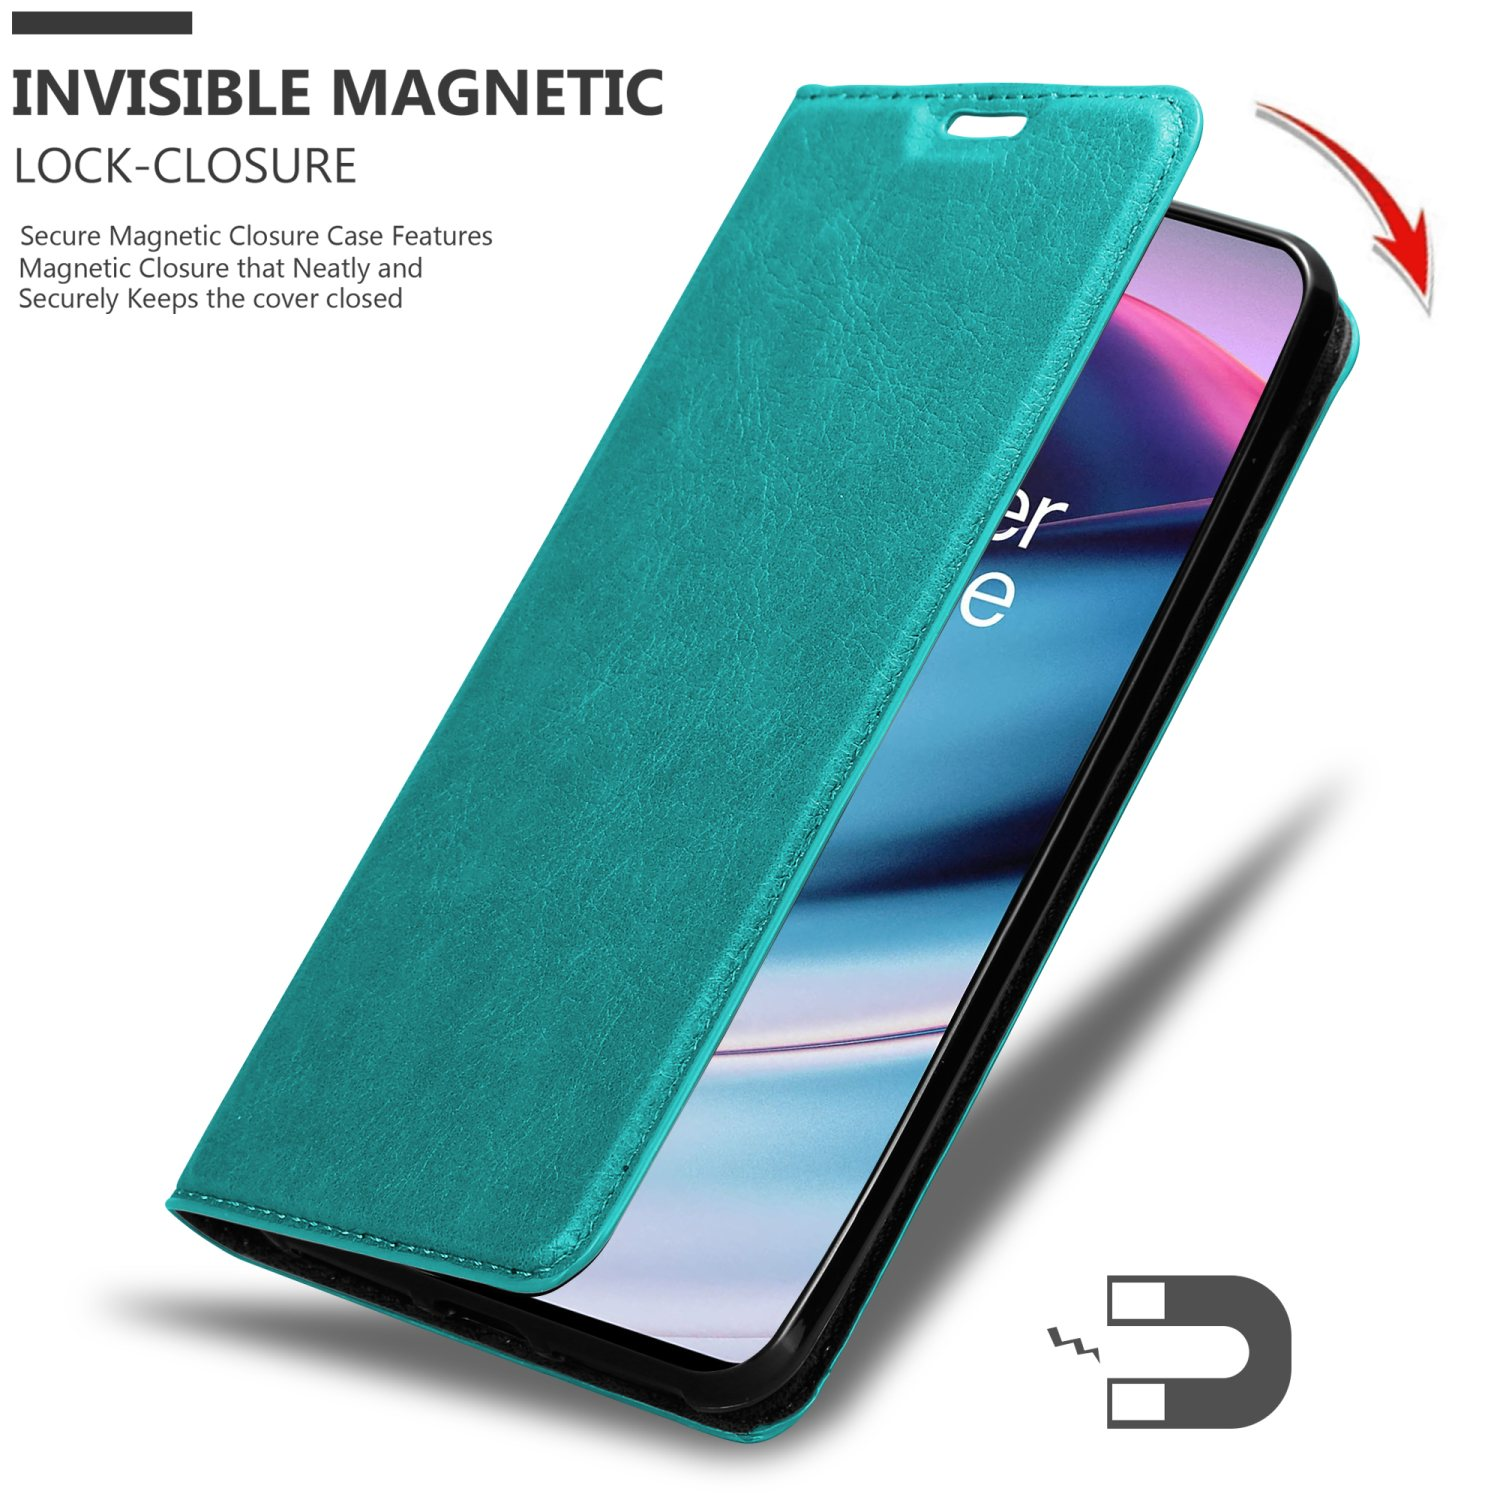 PETROL CE OnePlus, Bookcover, Invisible 5G, Nord Magnet, Book Hülle CADORABO TÜRKIS